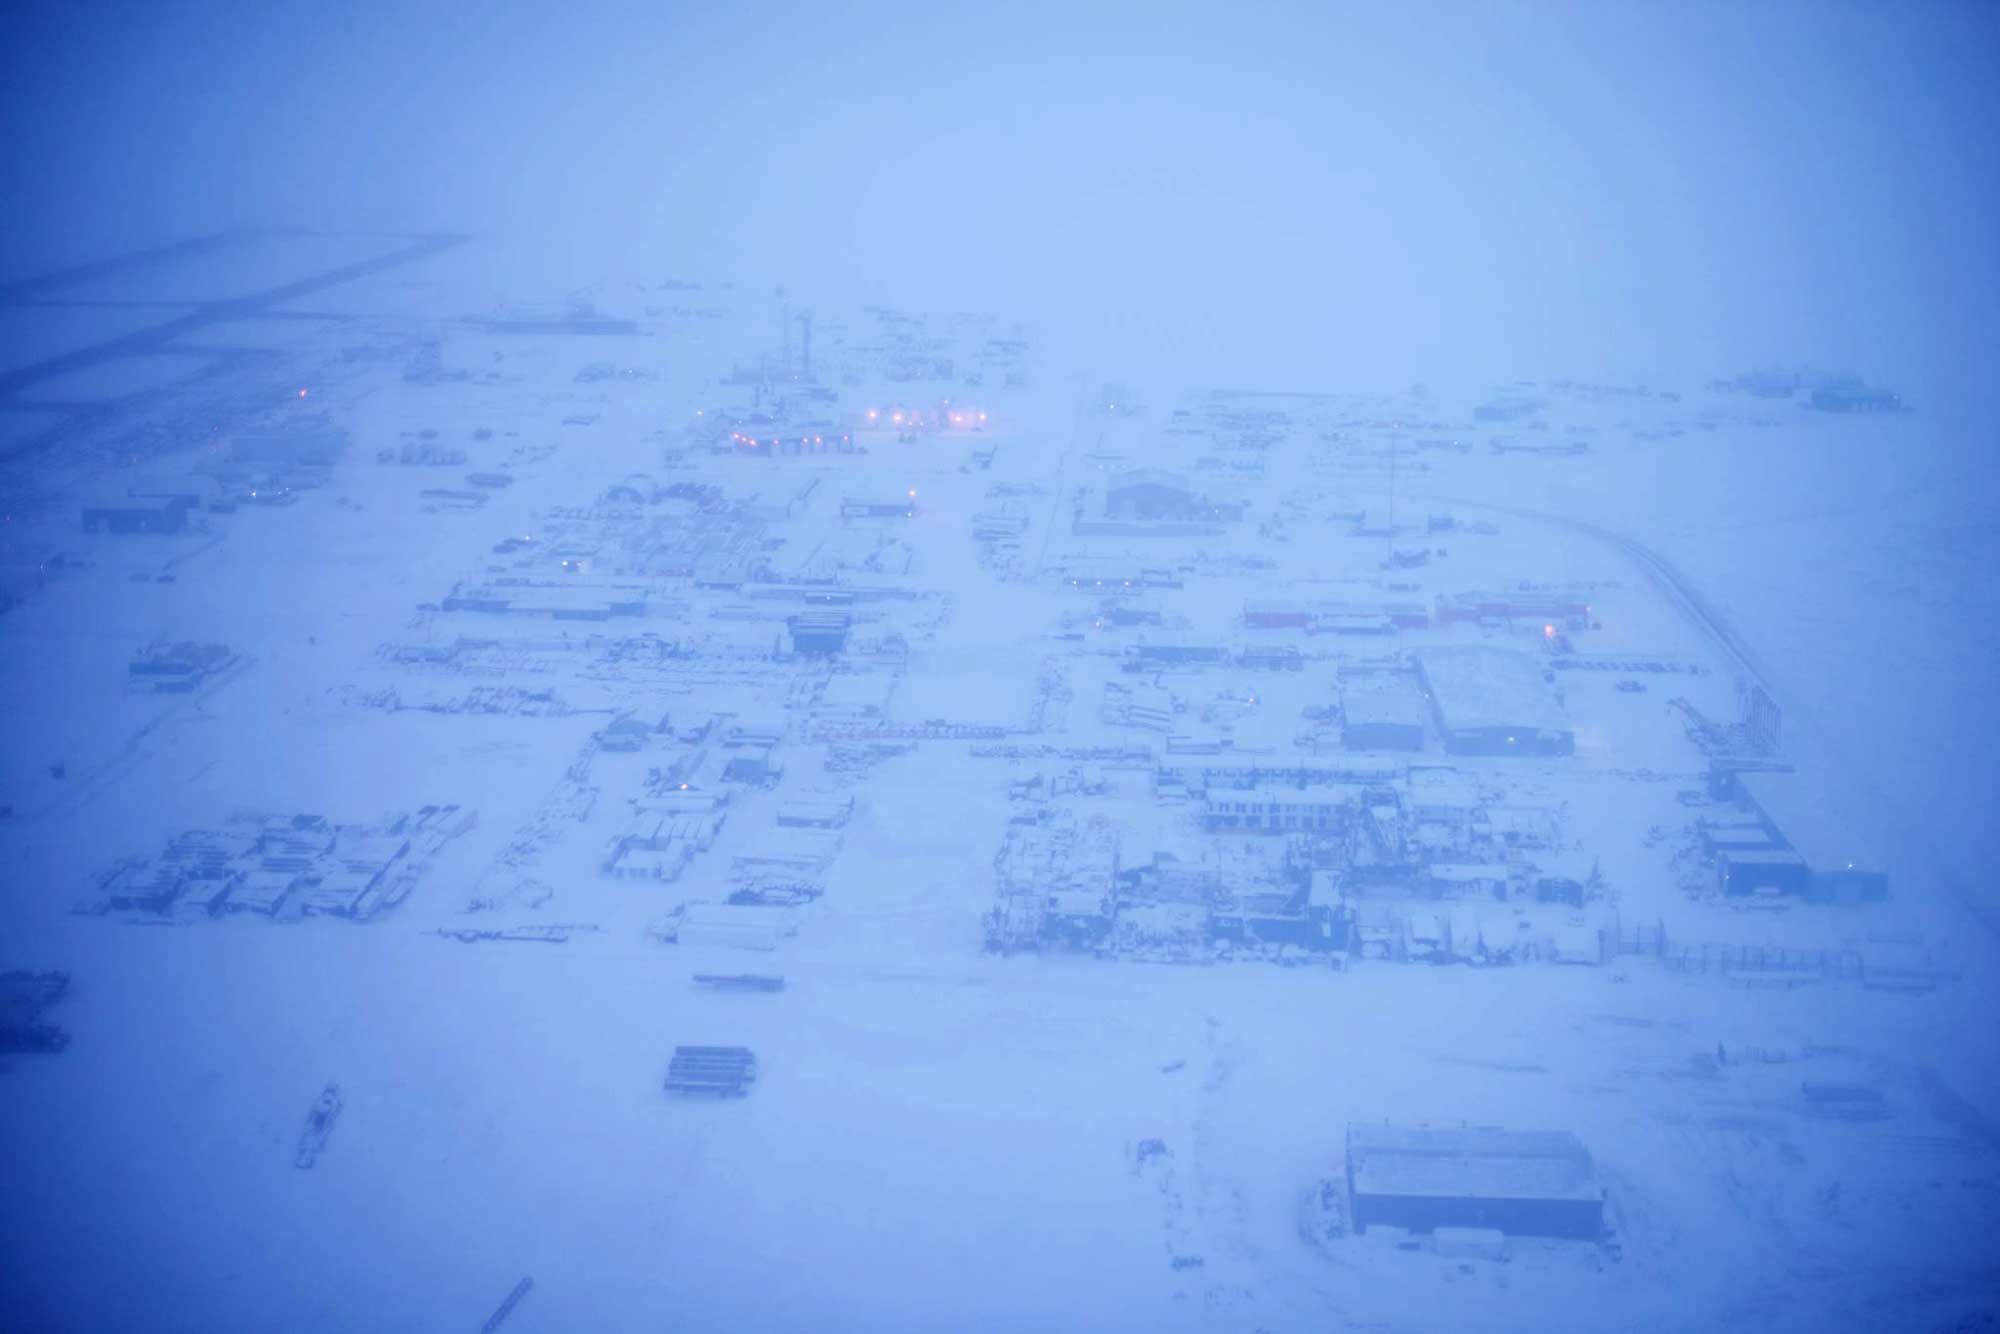 The industrial camp and base for the North Slope oil-producing community of Deadhorse, Alaska, covered in snow and ice, pictured from the air in March 2018.